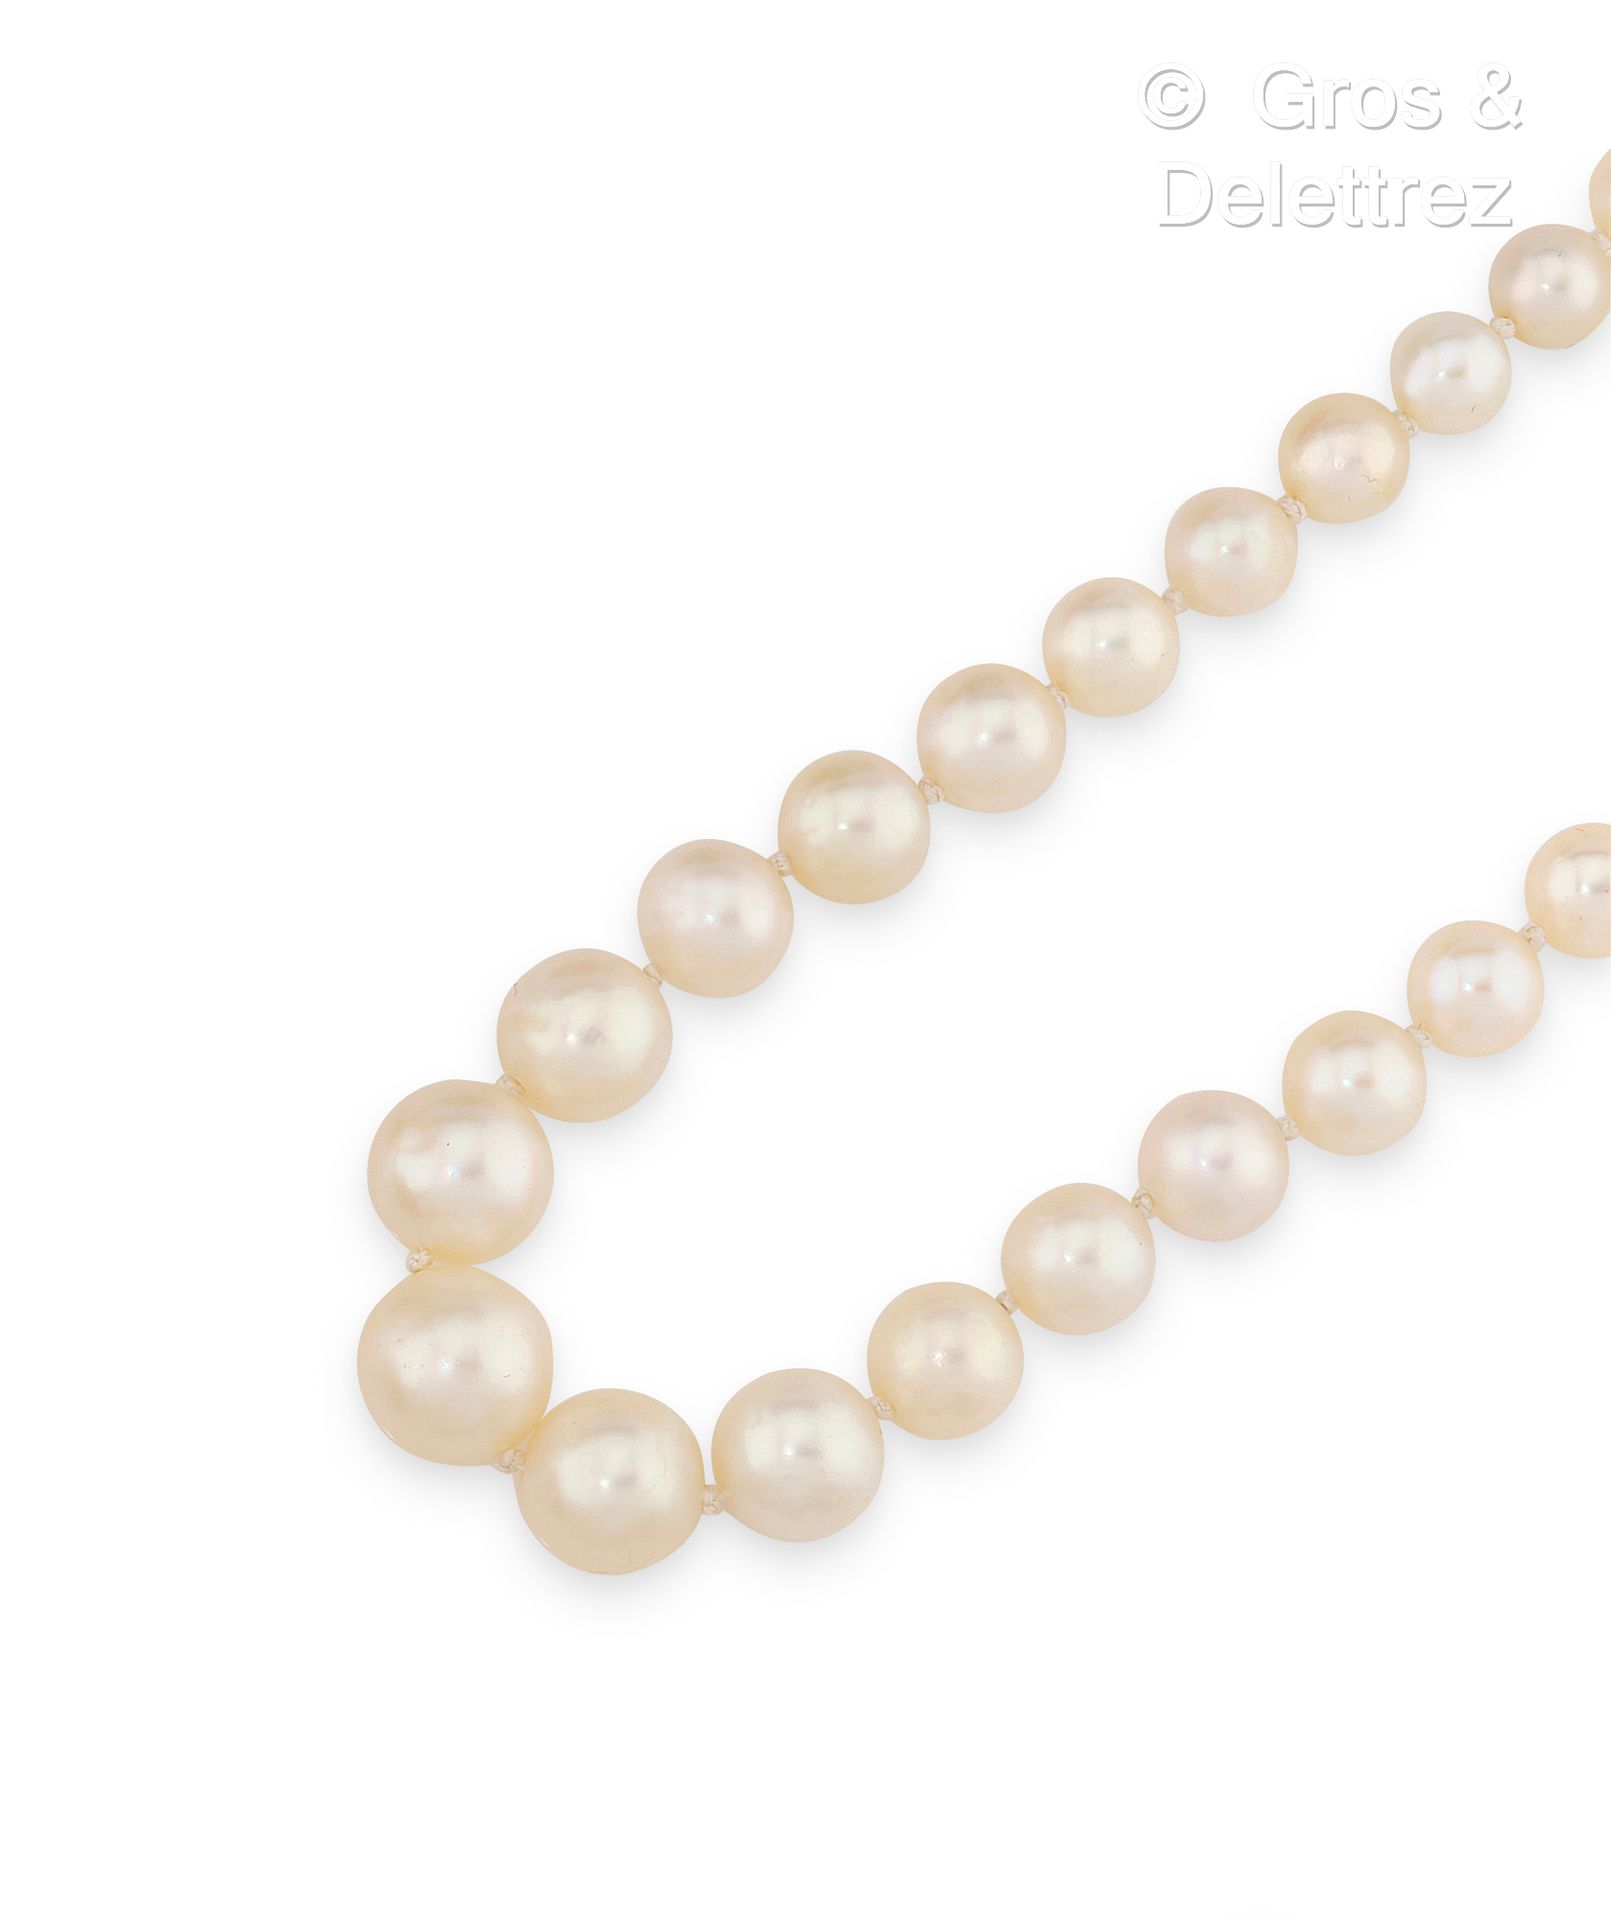 Null Necklace composed of a fall of fine pearls. The barrel-shaped clasp in whit&hellip;